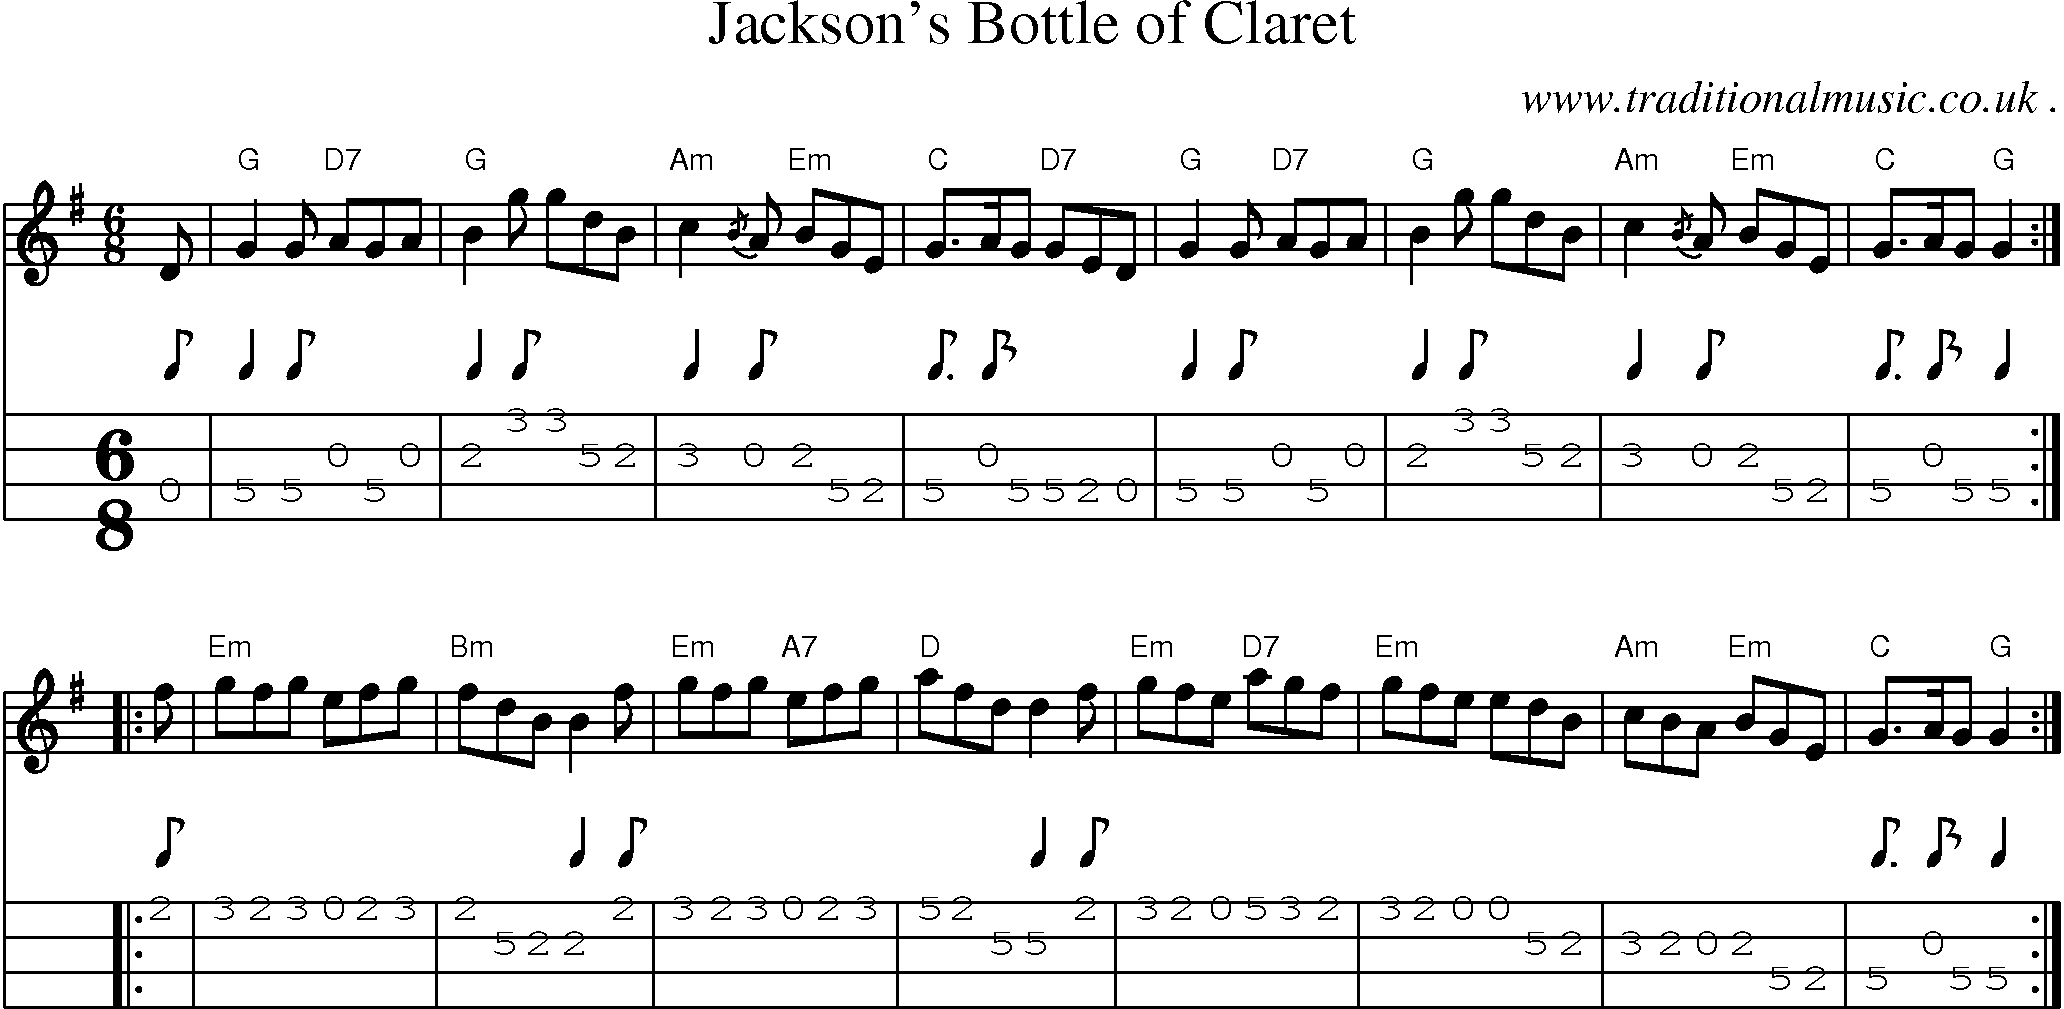 Sheet-music  score, Chords and Mandolin Tabs for Jacksons Bottle Of Claret